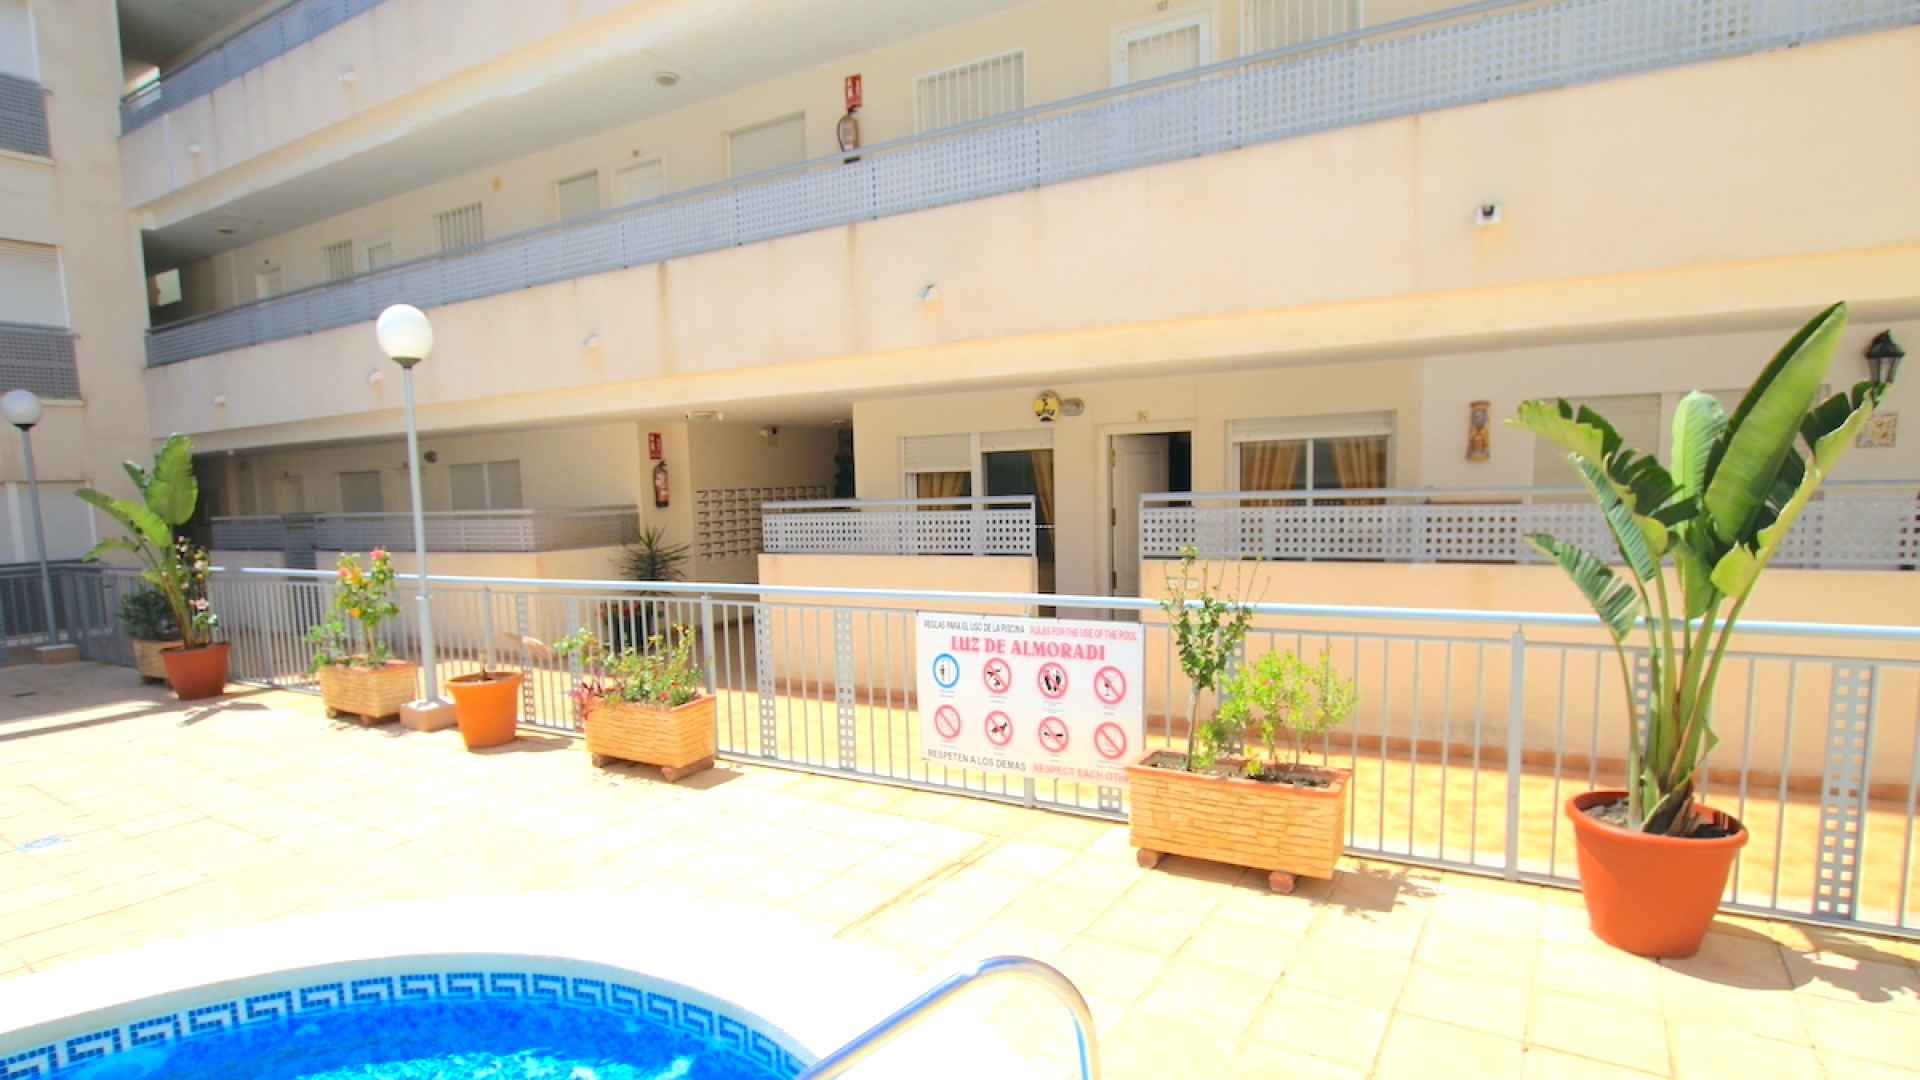 48447_spacious_2_bedroom_ground_floor_apartment_with_pool_views_090524155039_img_9213